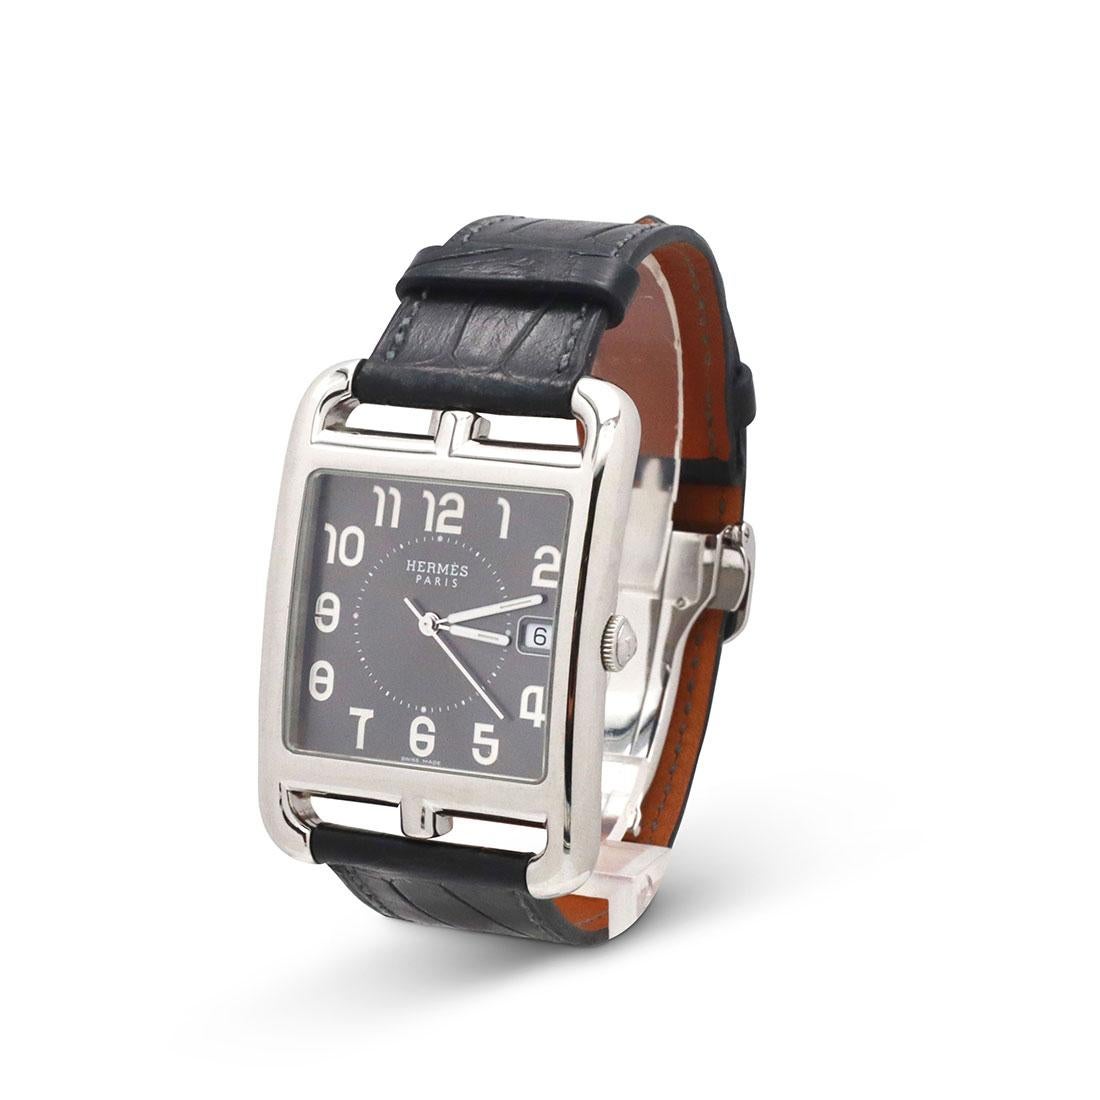 Authentic Hermès Cape Cod ladies watch crafted in stainless steel.  The case measures 33mm x 33mm, 46mm lug to lug.  Sunray slate dial, with Arabic numerals and date at 3 o'clock.  Interchangeable croc-embossed black leather strap with stainless